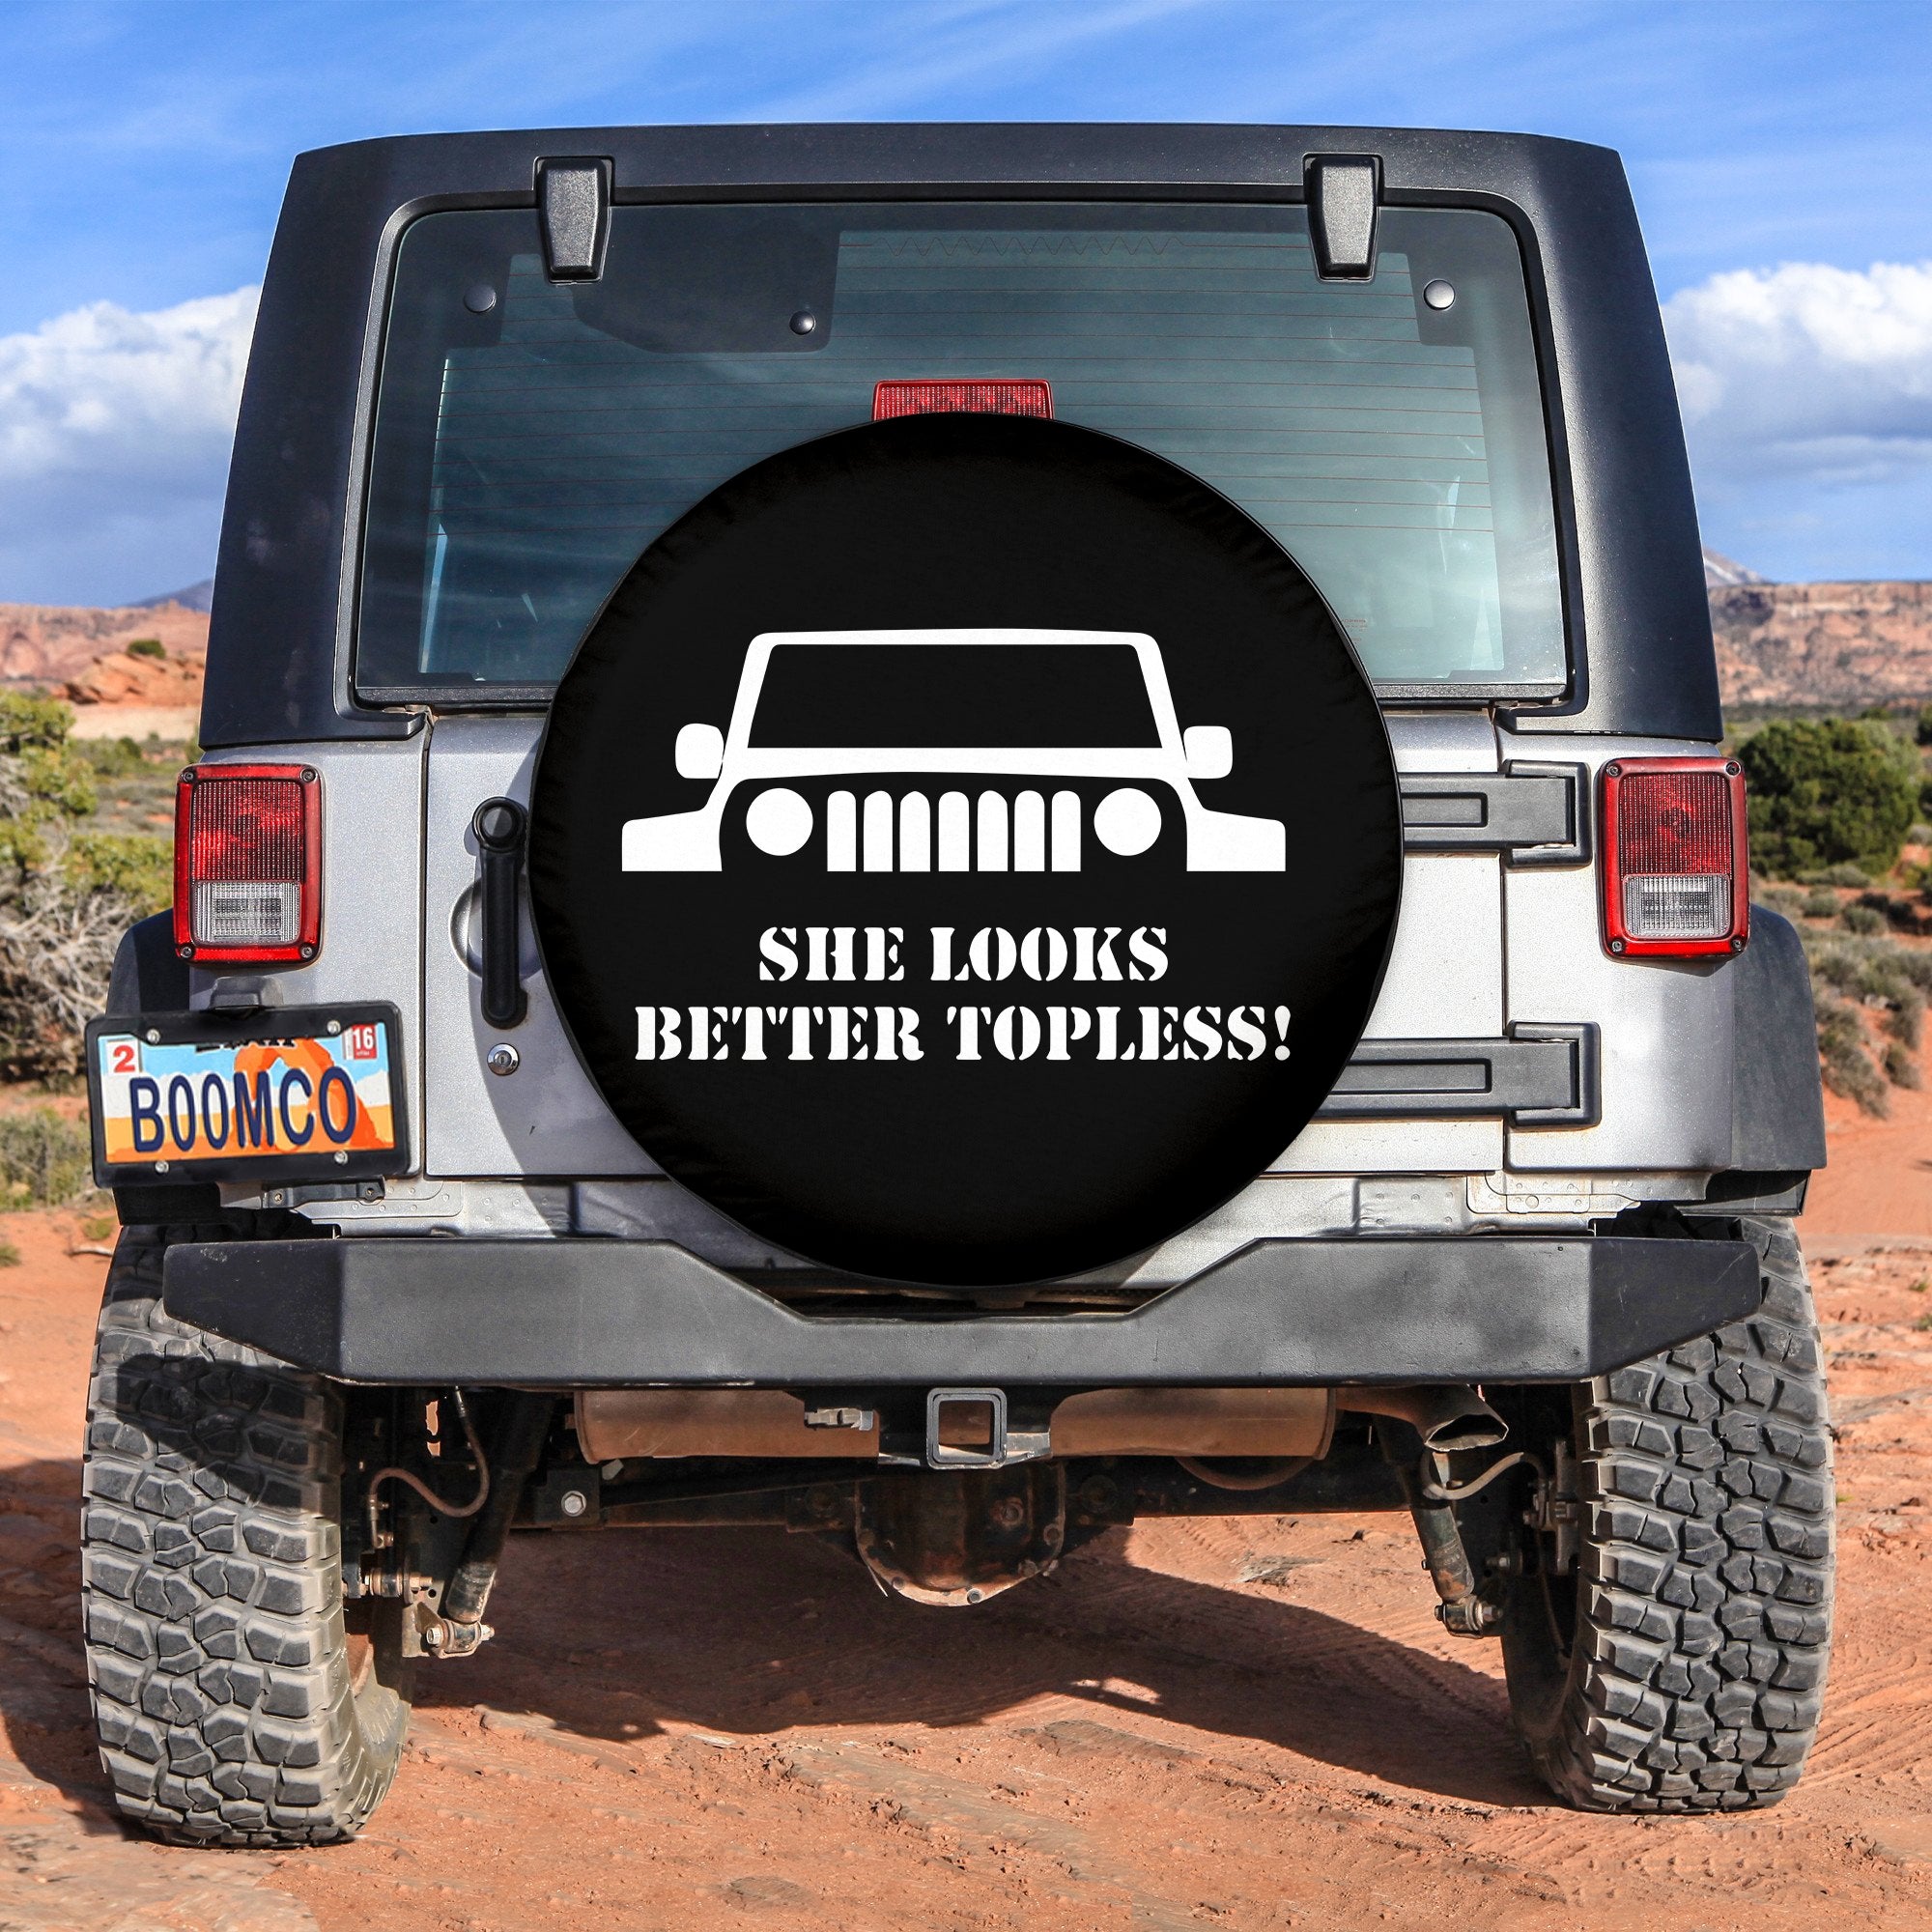 Funny She Look Better Topless Spare Tire Cover Gift For Campers Nearkii